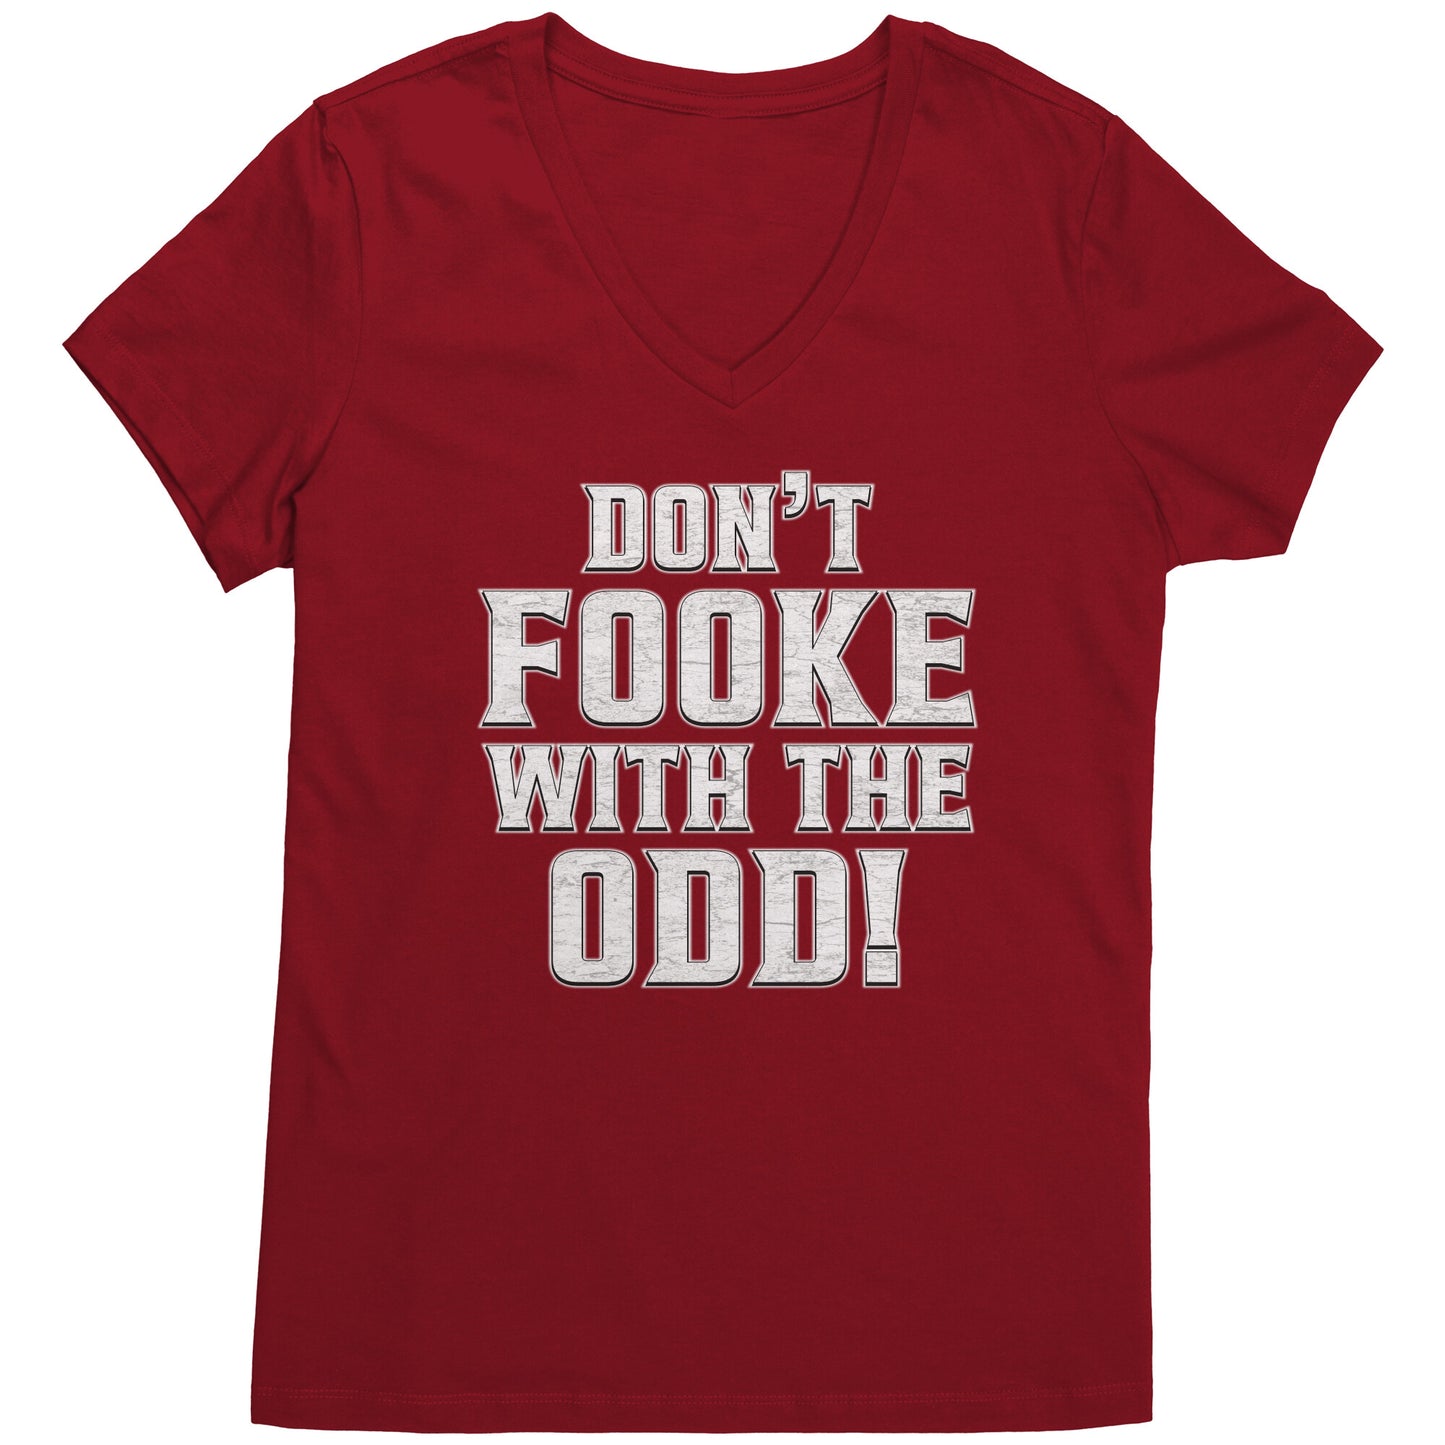 Don't Fooke With The Odd! Women's Dark-Colored V-Neck Tee